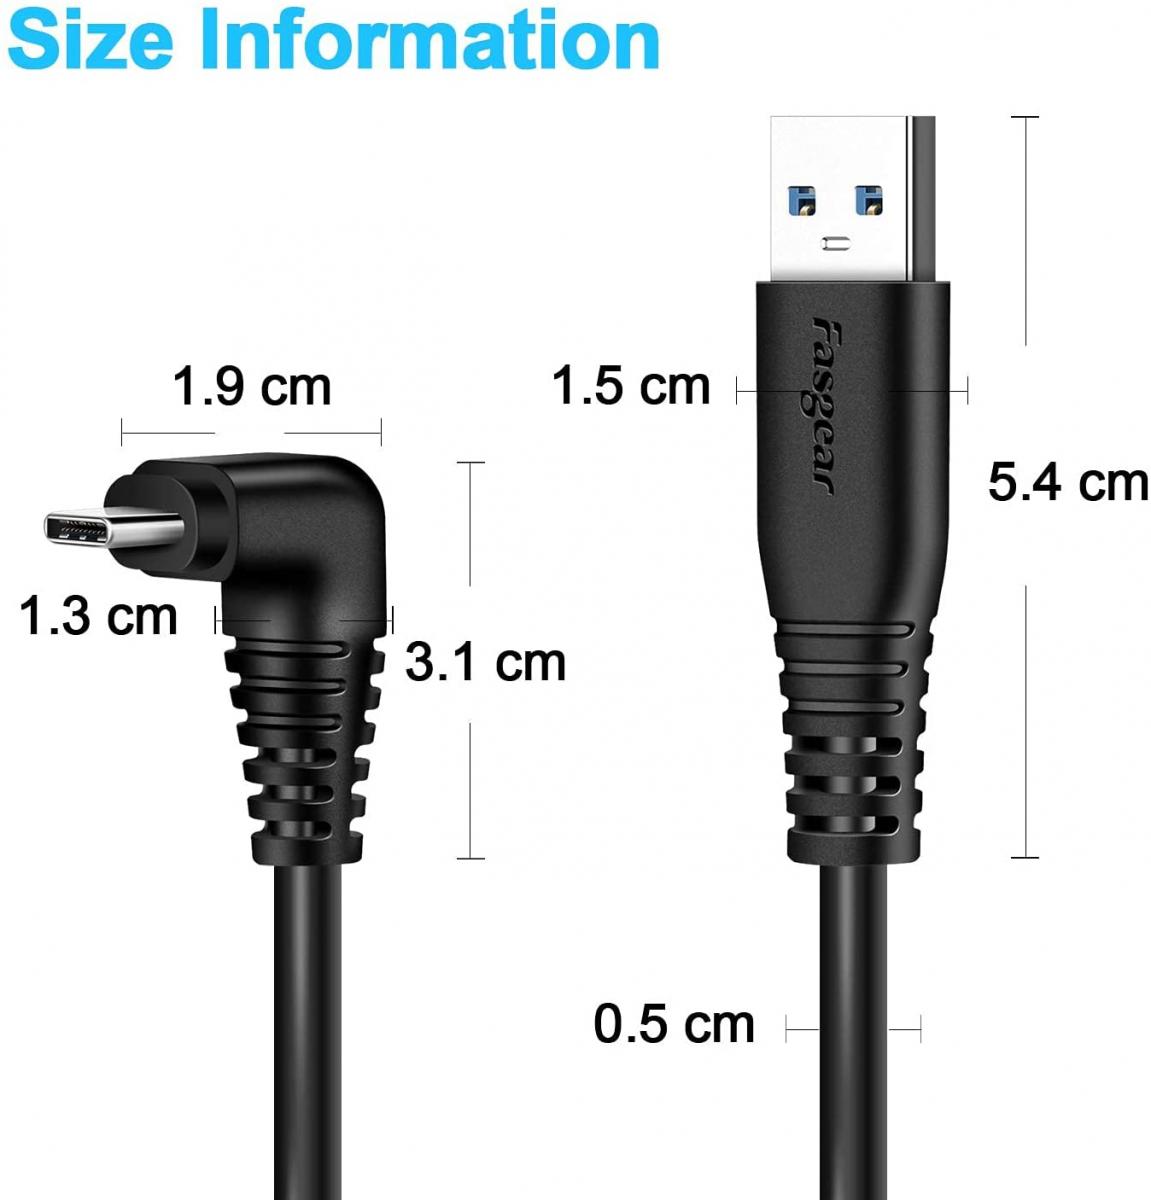 Coiled Cable Stretches to 1.5m USB 2.0 Bent AM to Bent BM Retractable Coiled Cable for Printer 